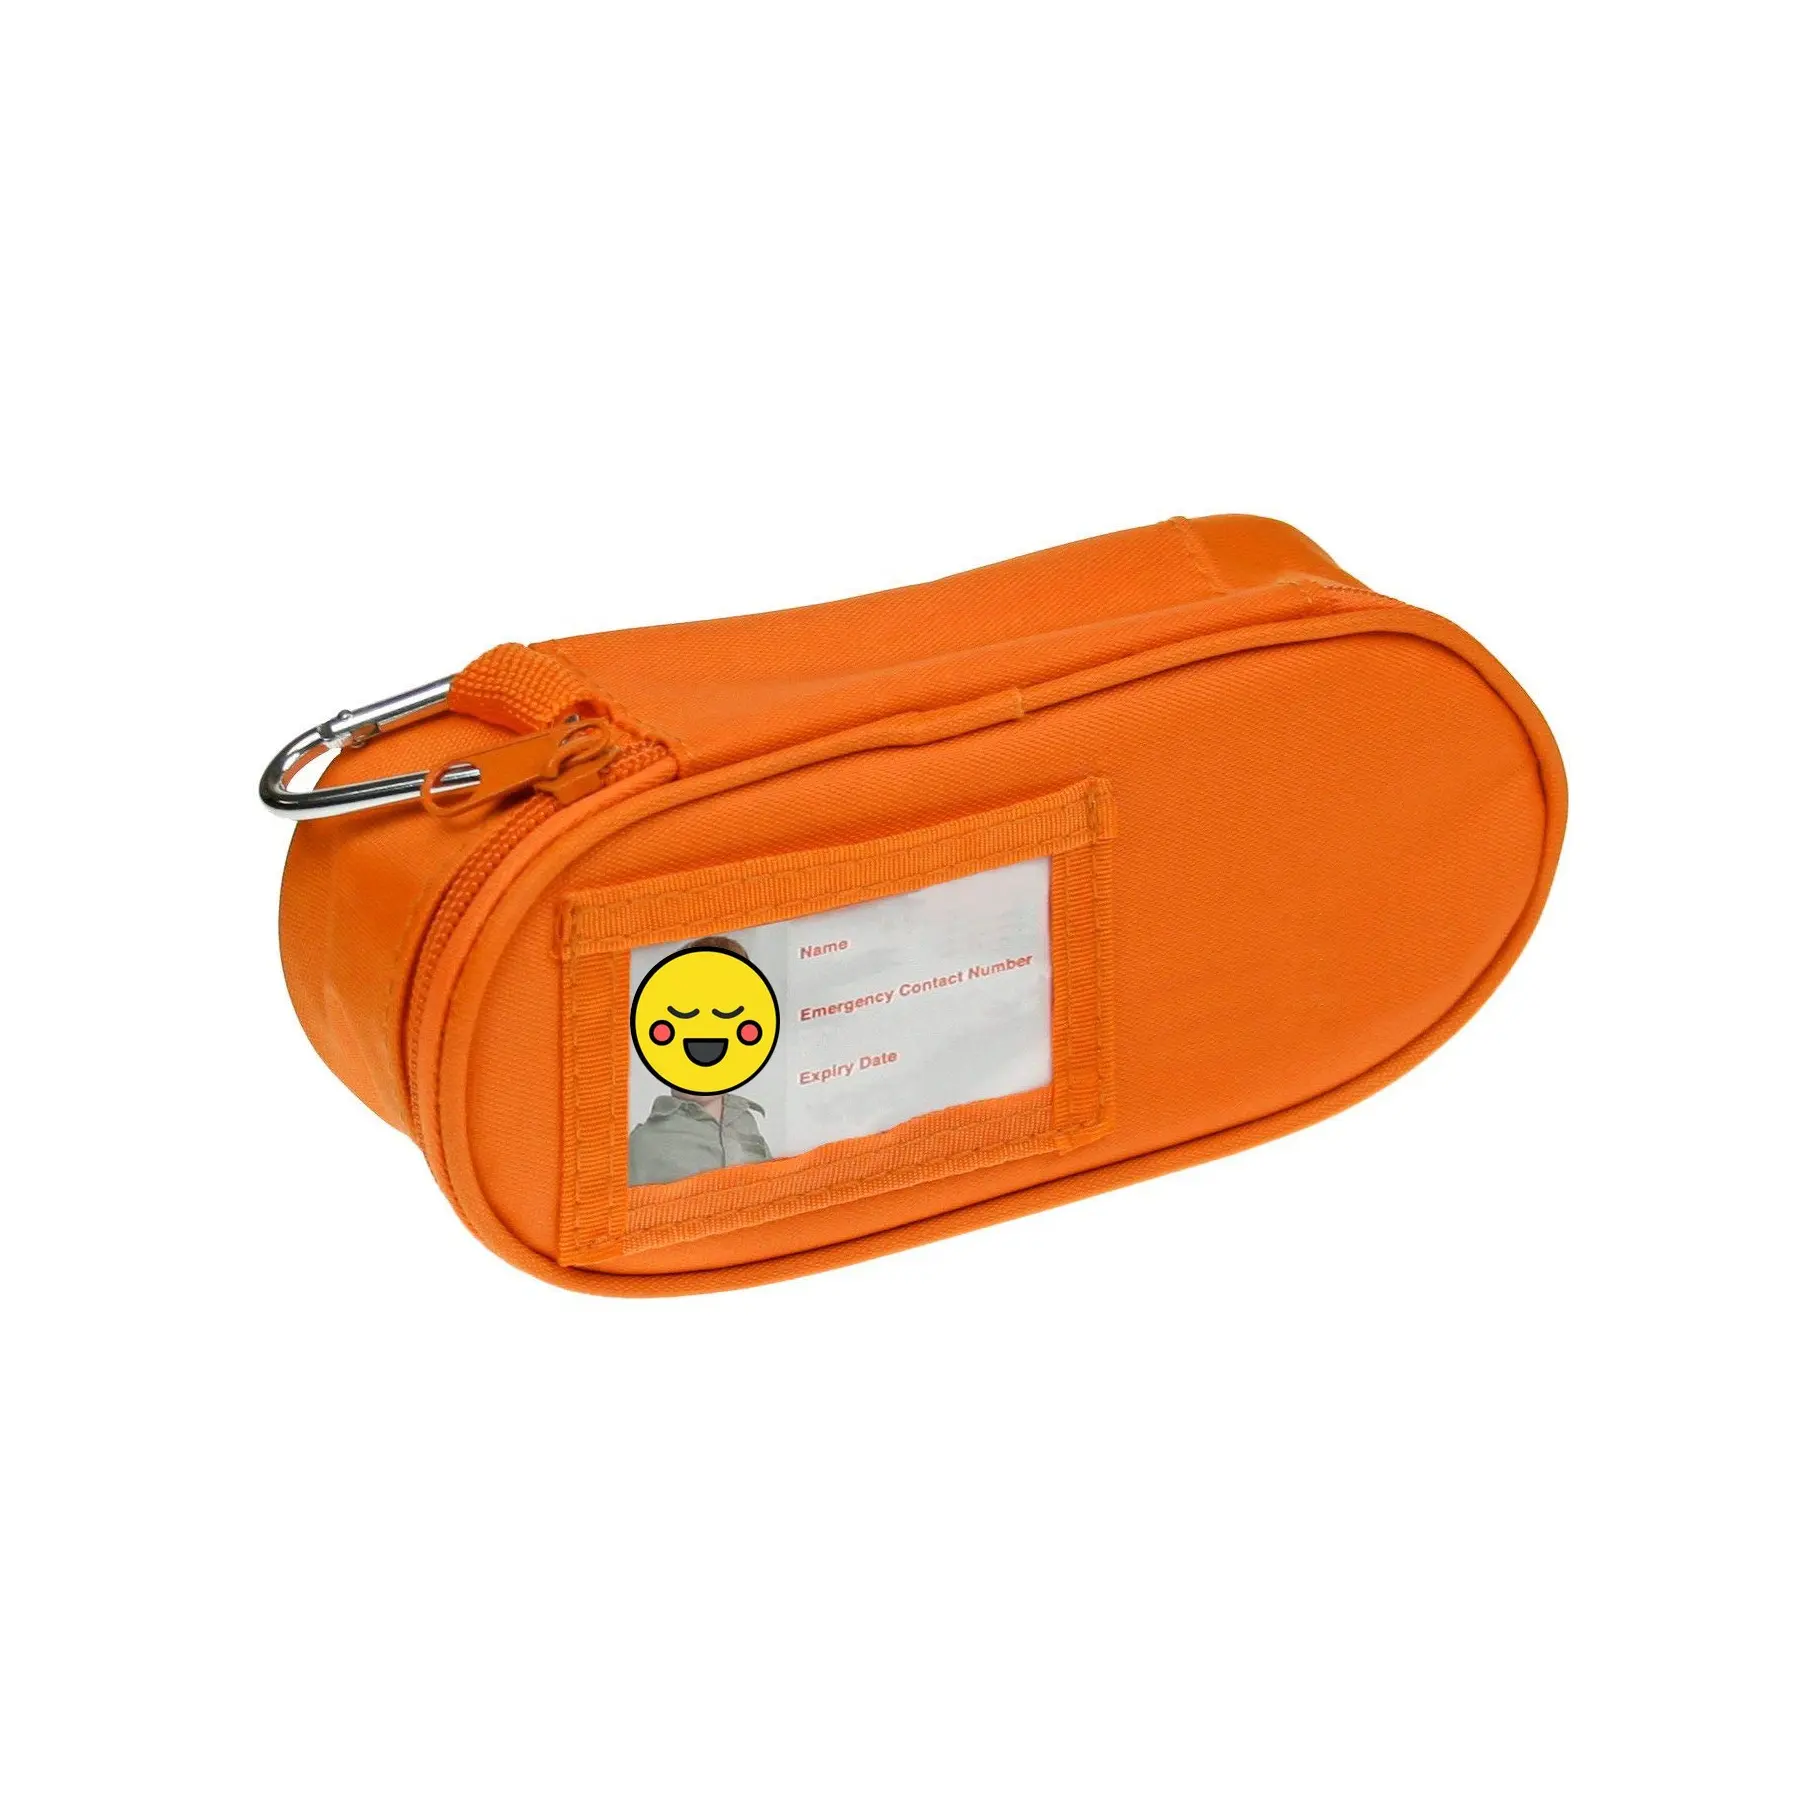 Medical Bag For Store & Carry Medication for Diabetes, Epilepsy & Asthma, Inhalers, Epipens, Insulin & more